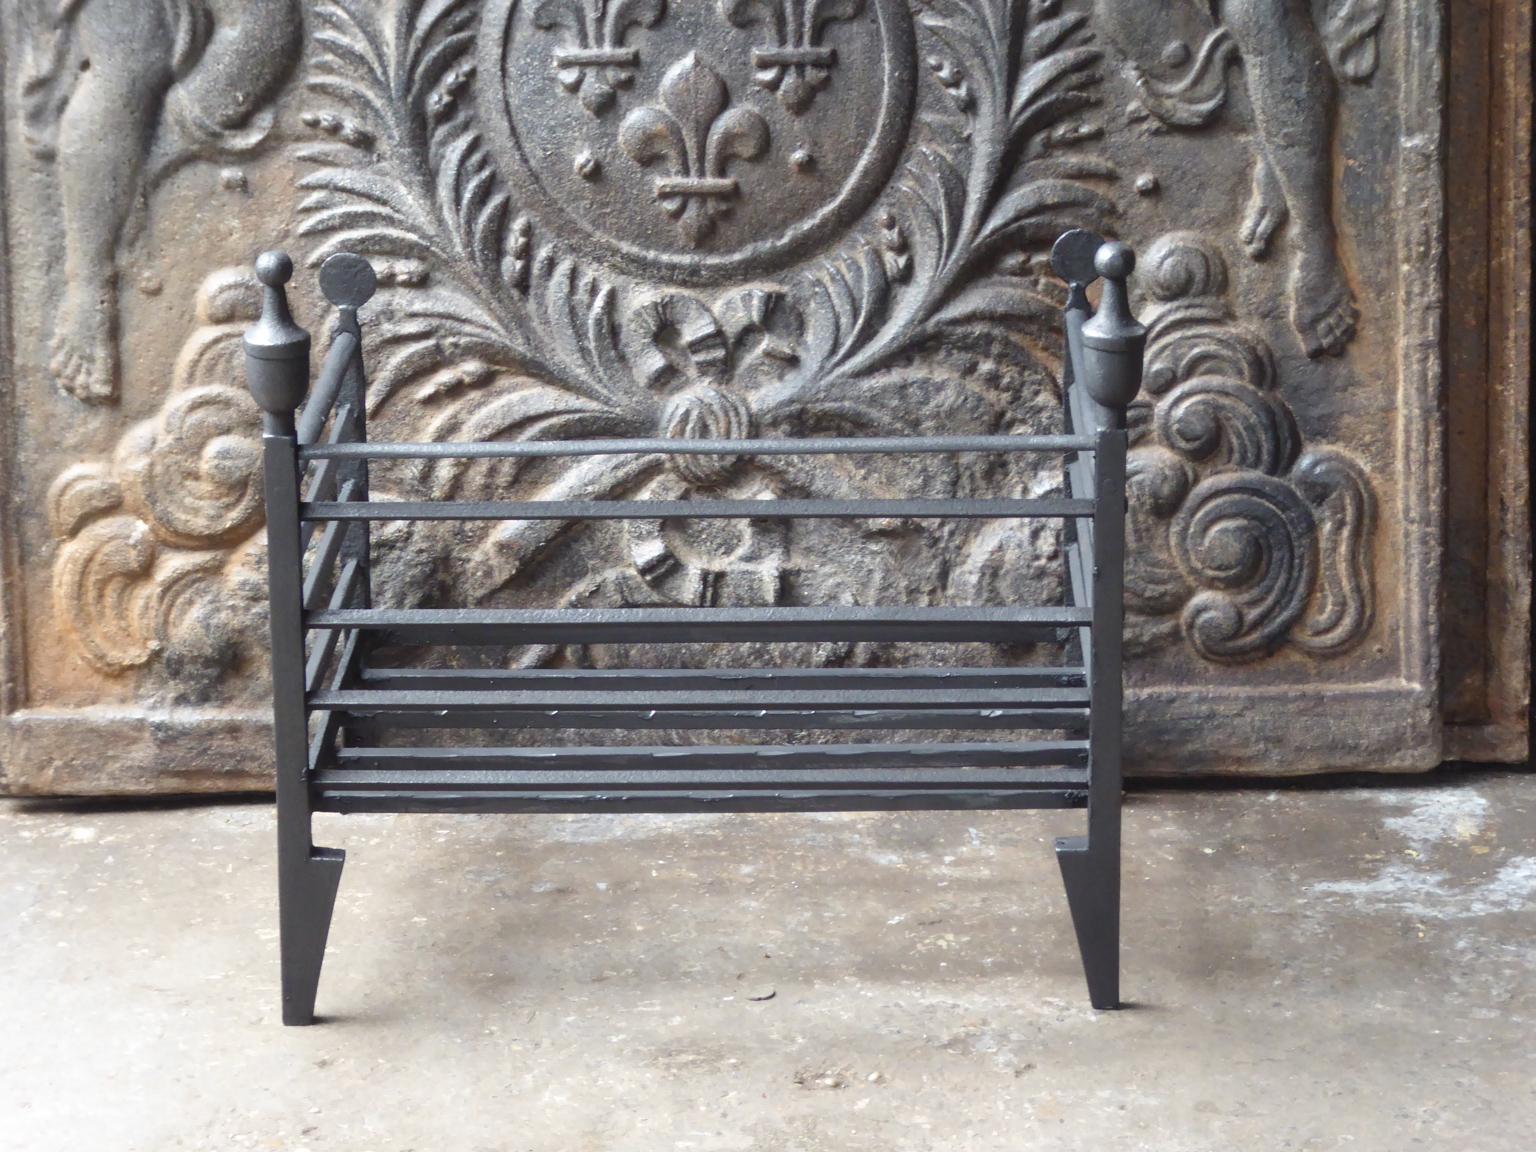 18th-19th century English Georgian fireplace grate made of wrought iron. The fireplace grate is in a good condition and is fully functional. 







